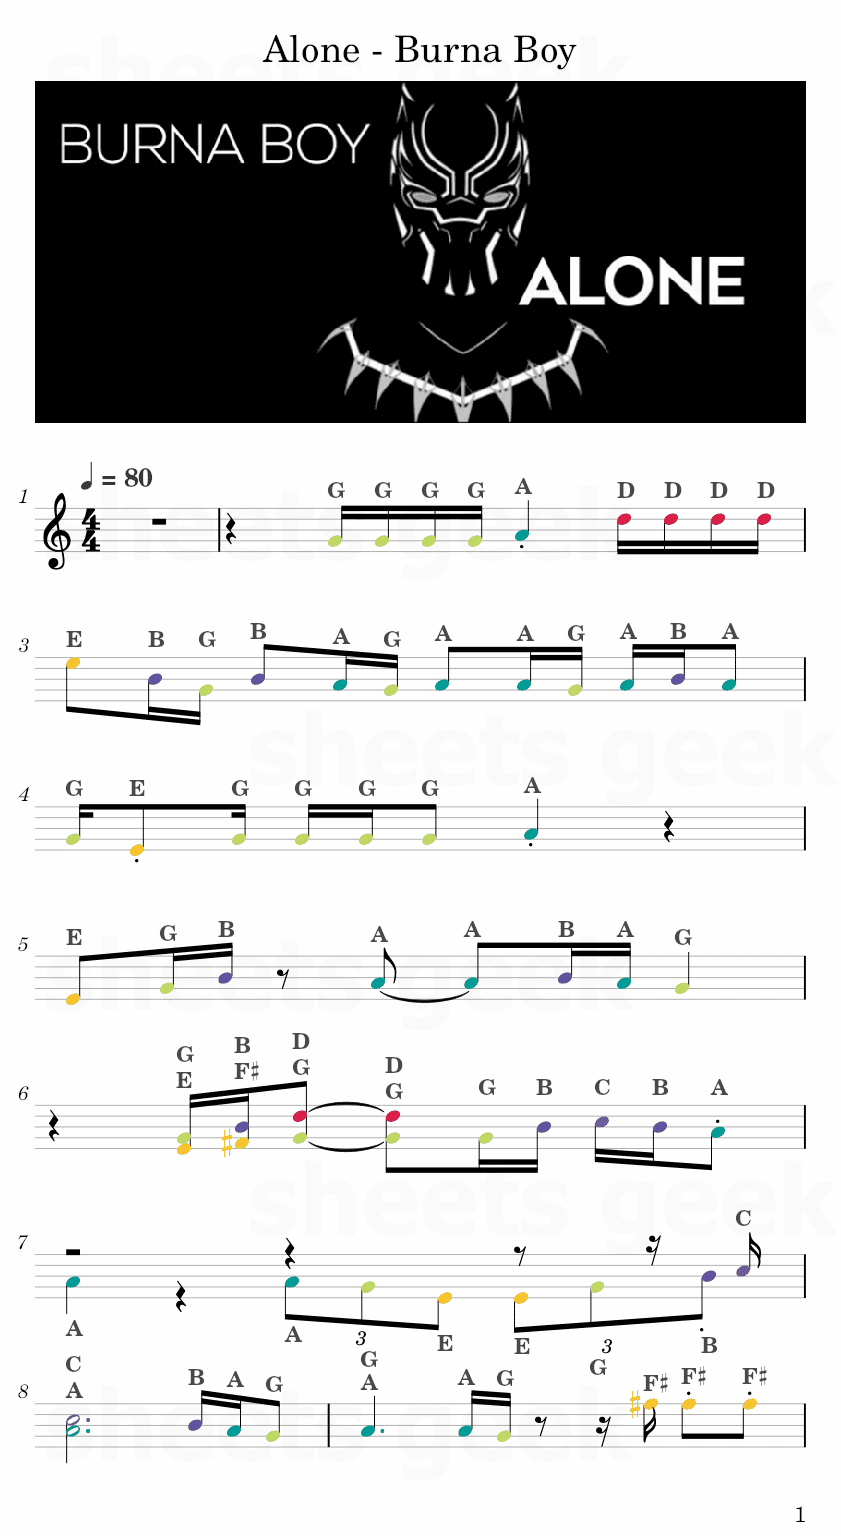 Alone - Burna Boy Black Panther Wakanda Forever Easy Sheet Music Free for piano, keyboard, flute, violin, sax, cello page 1